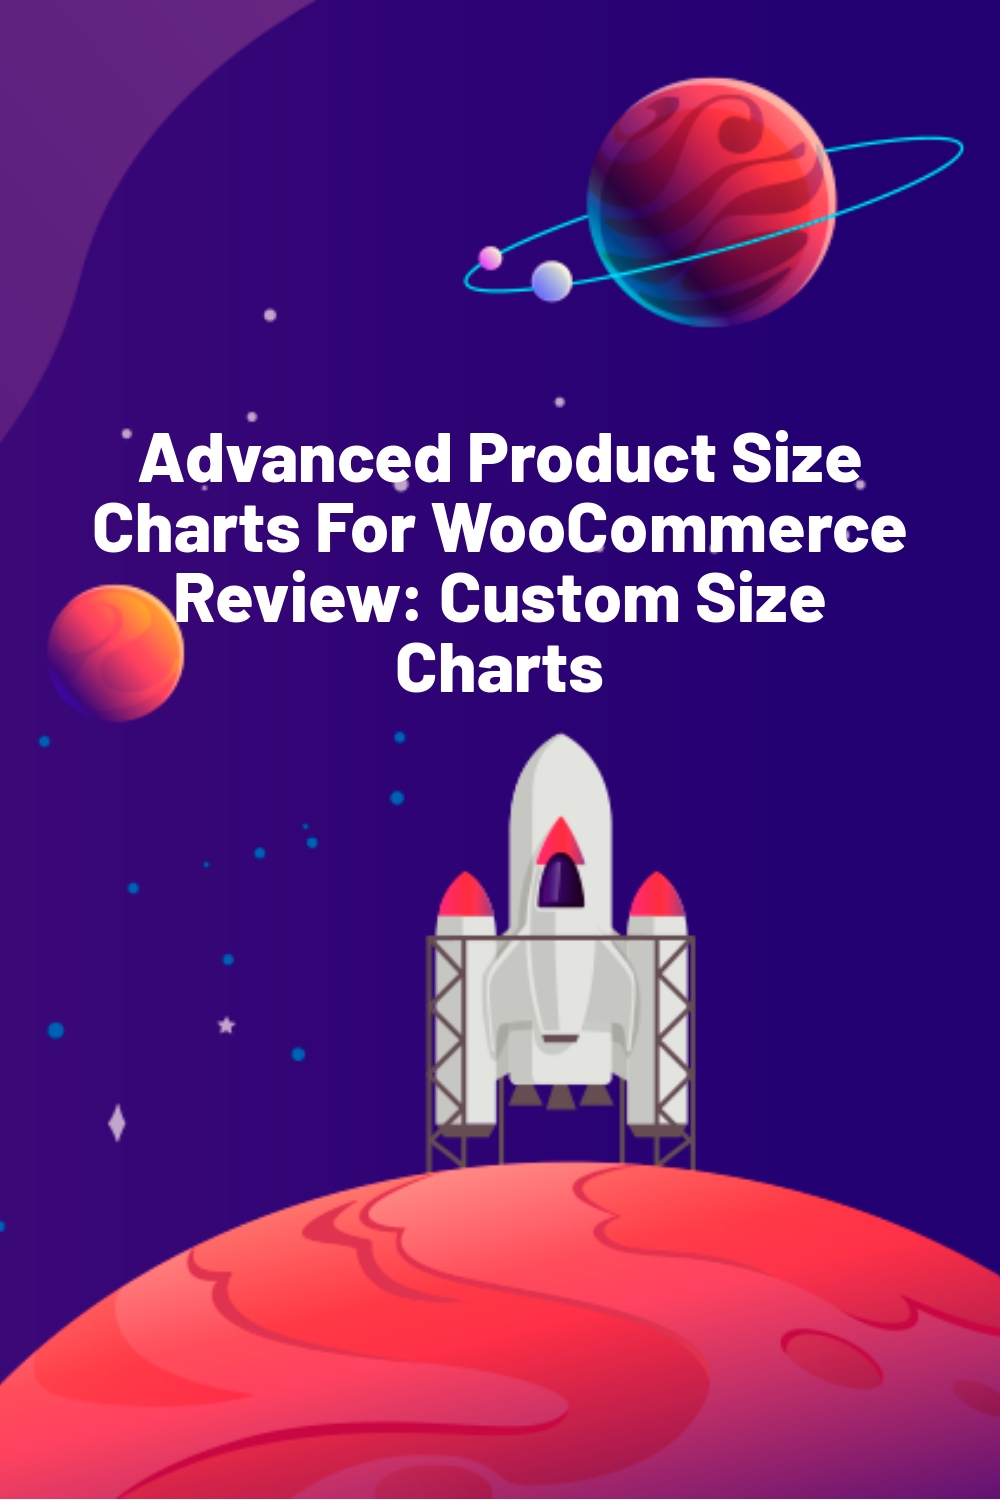 Advanced Product Size Charts For WooCommerce Review: Custom Size Charts